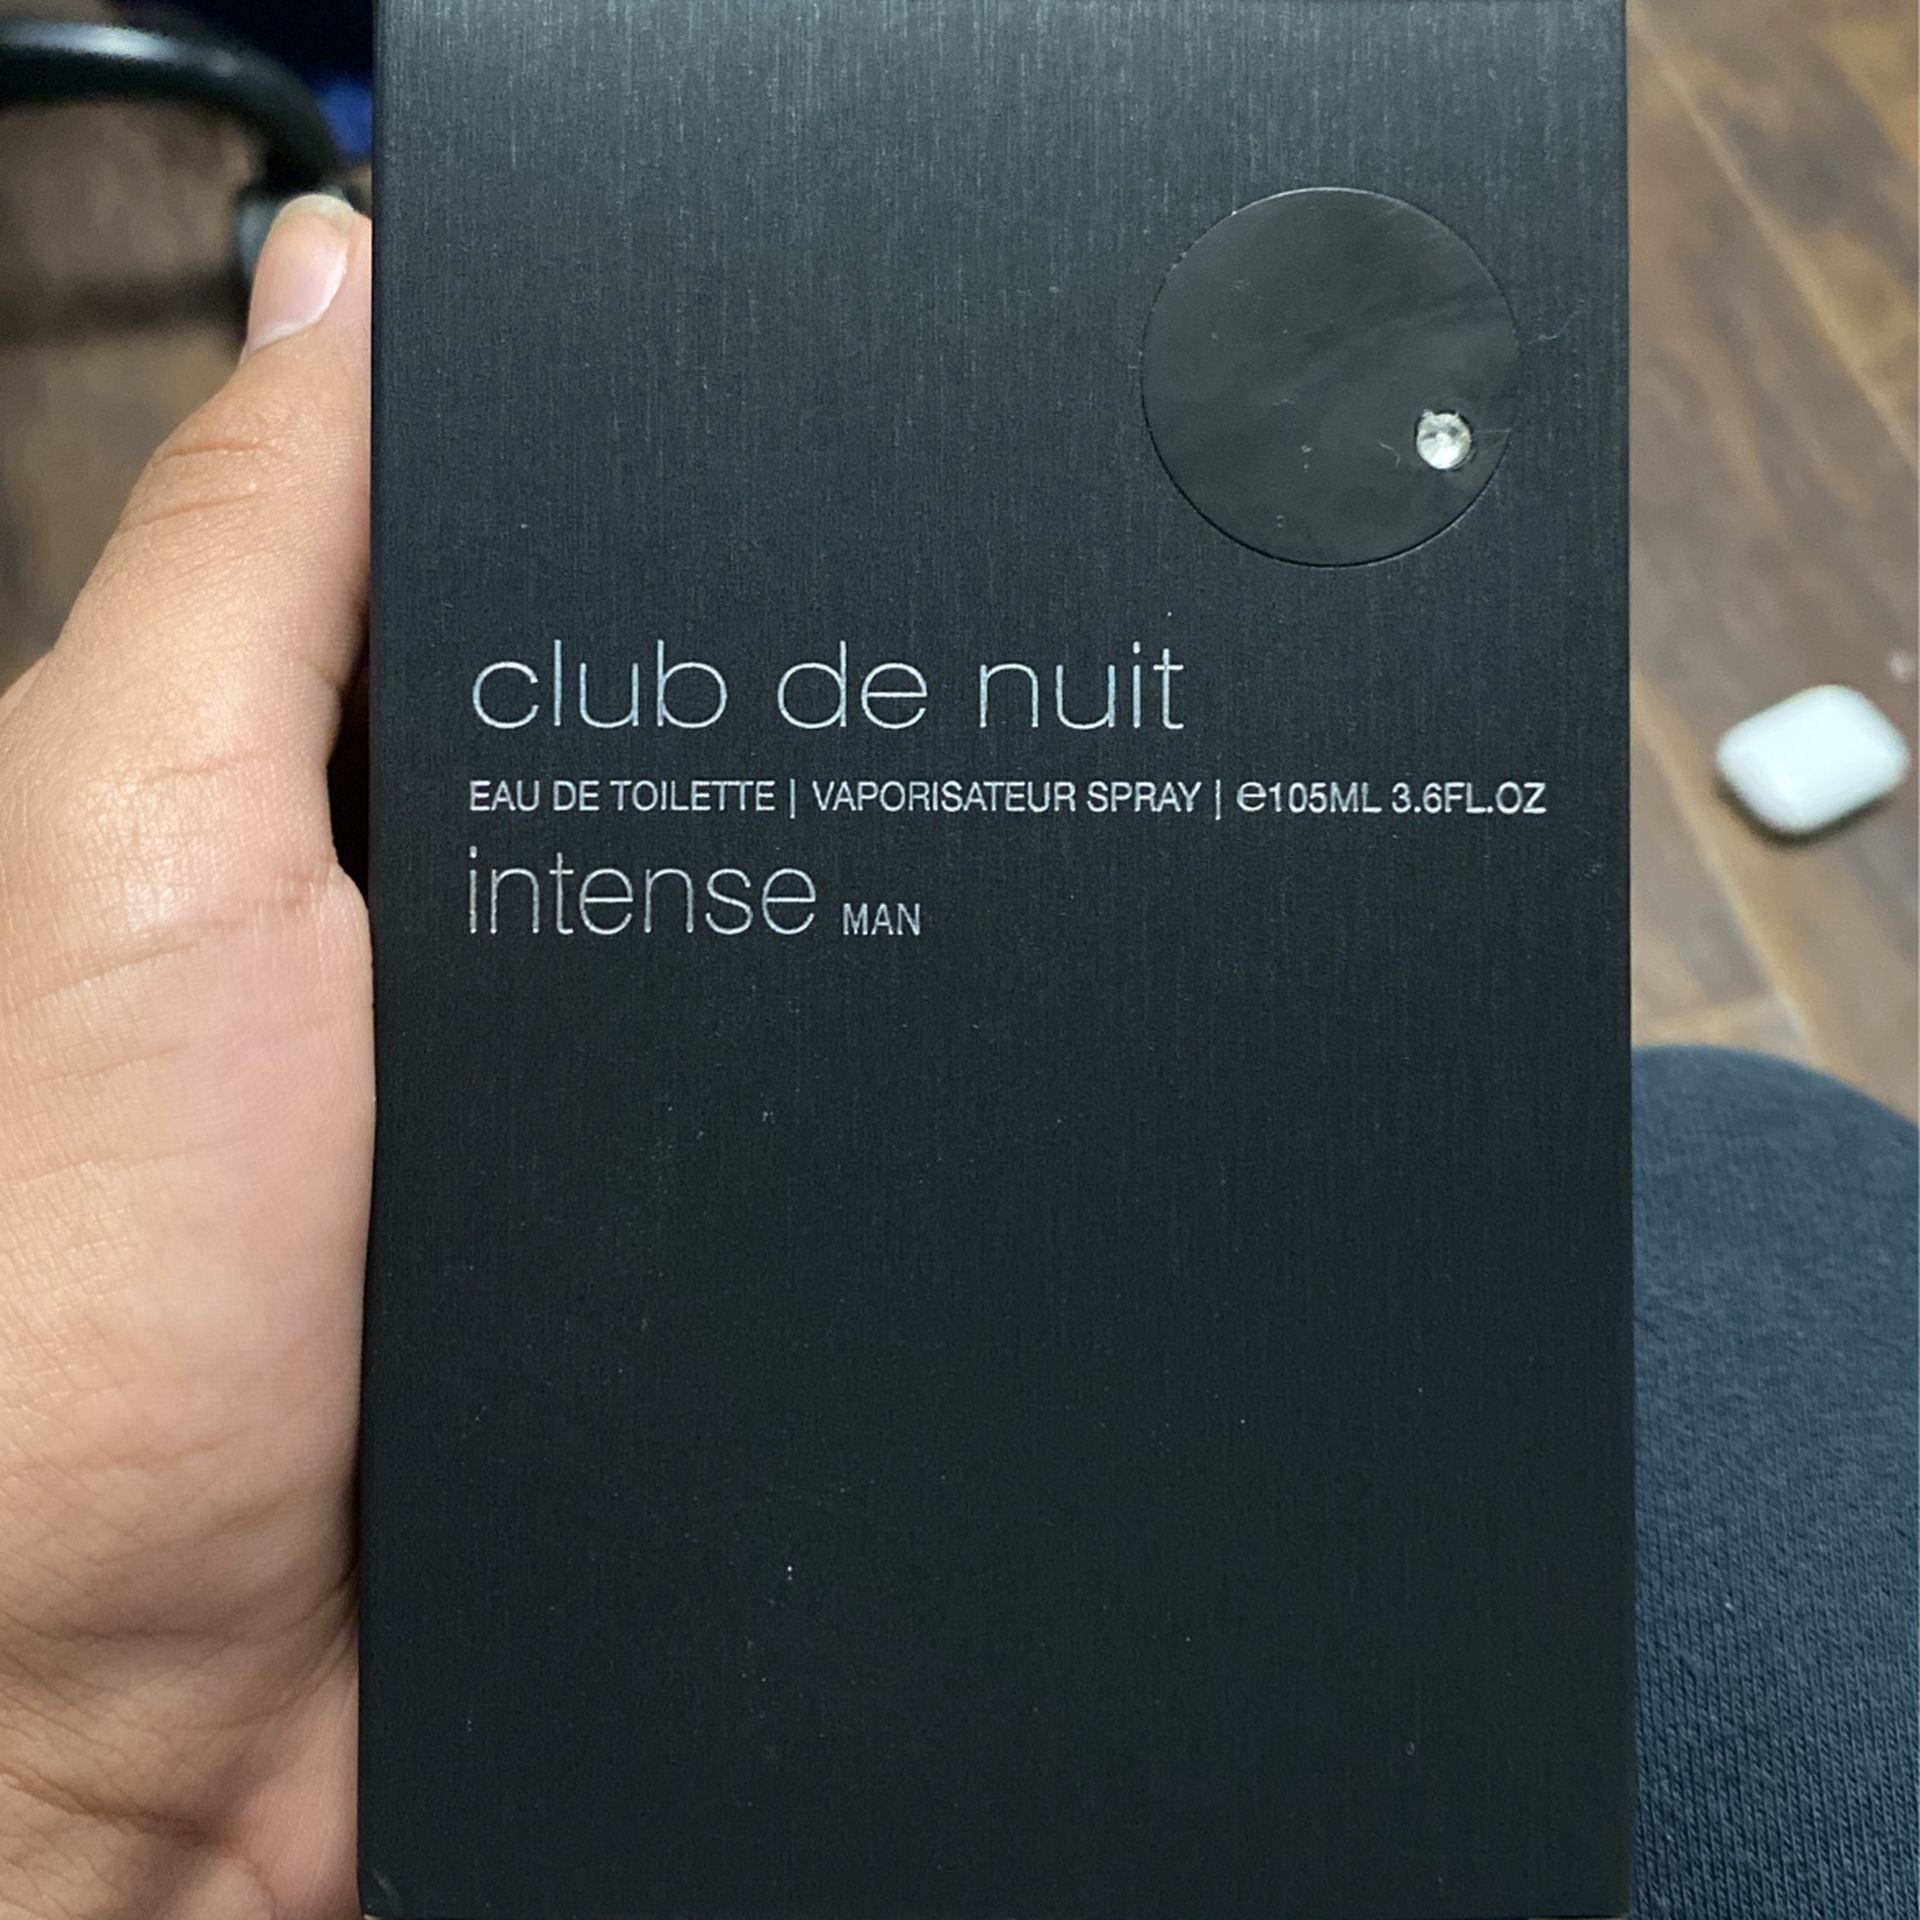 club de nuit cologne for Sale in Lakeville, MN - OfferUp